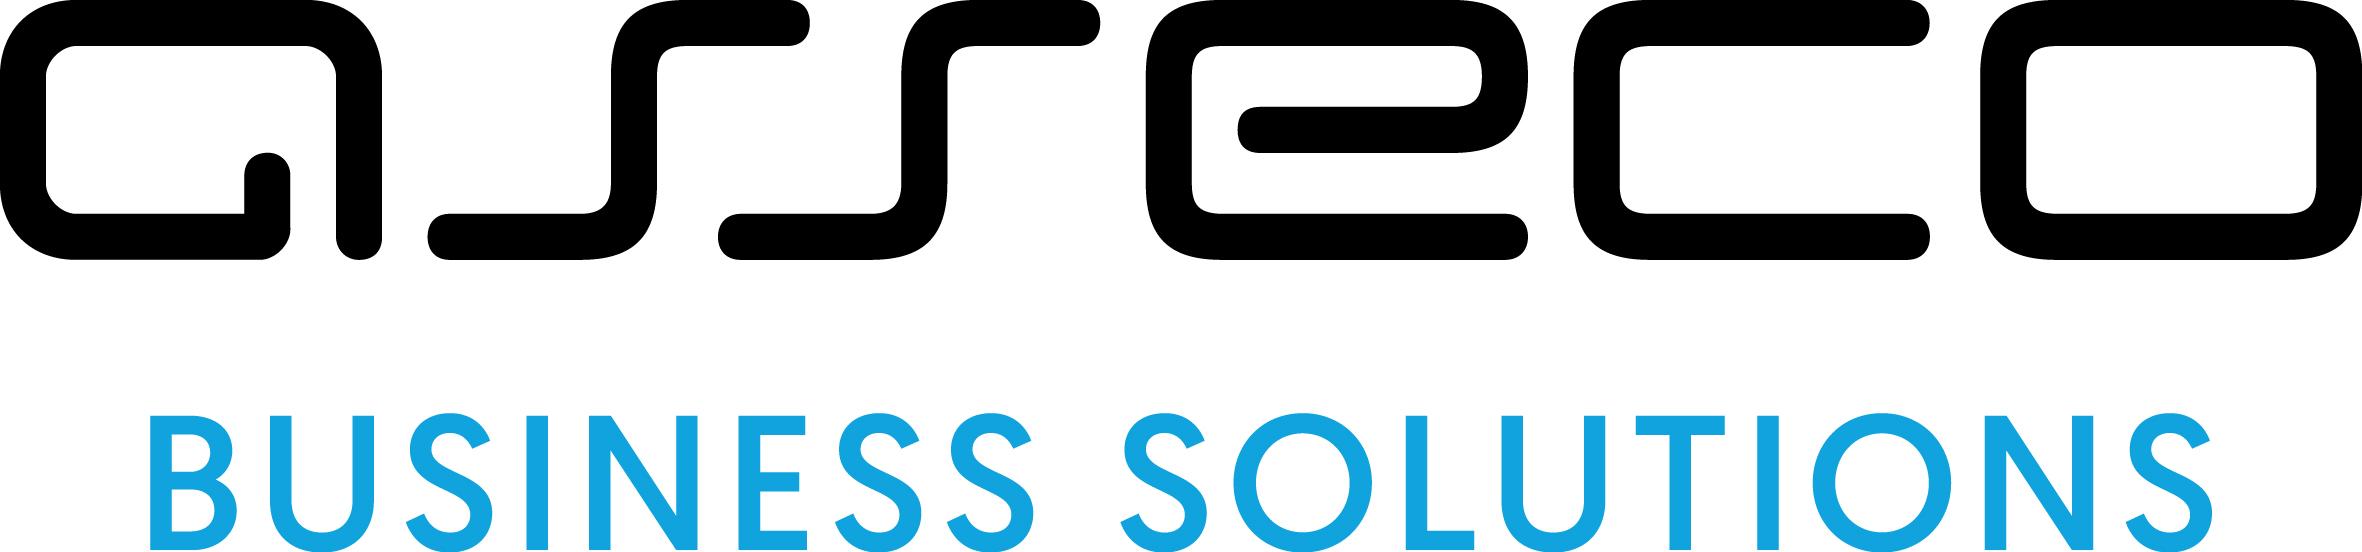 Asseco Business Solutions